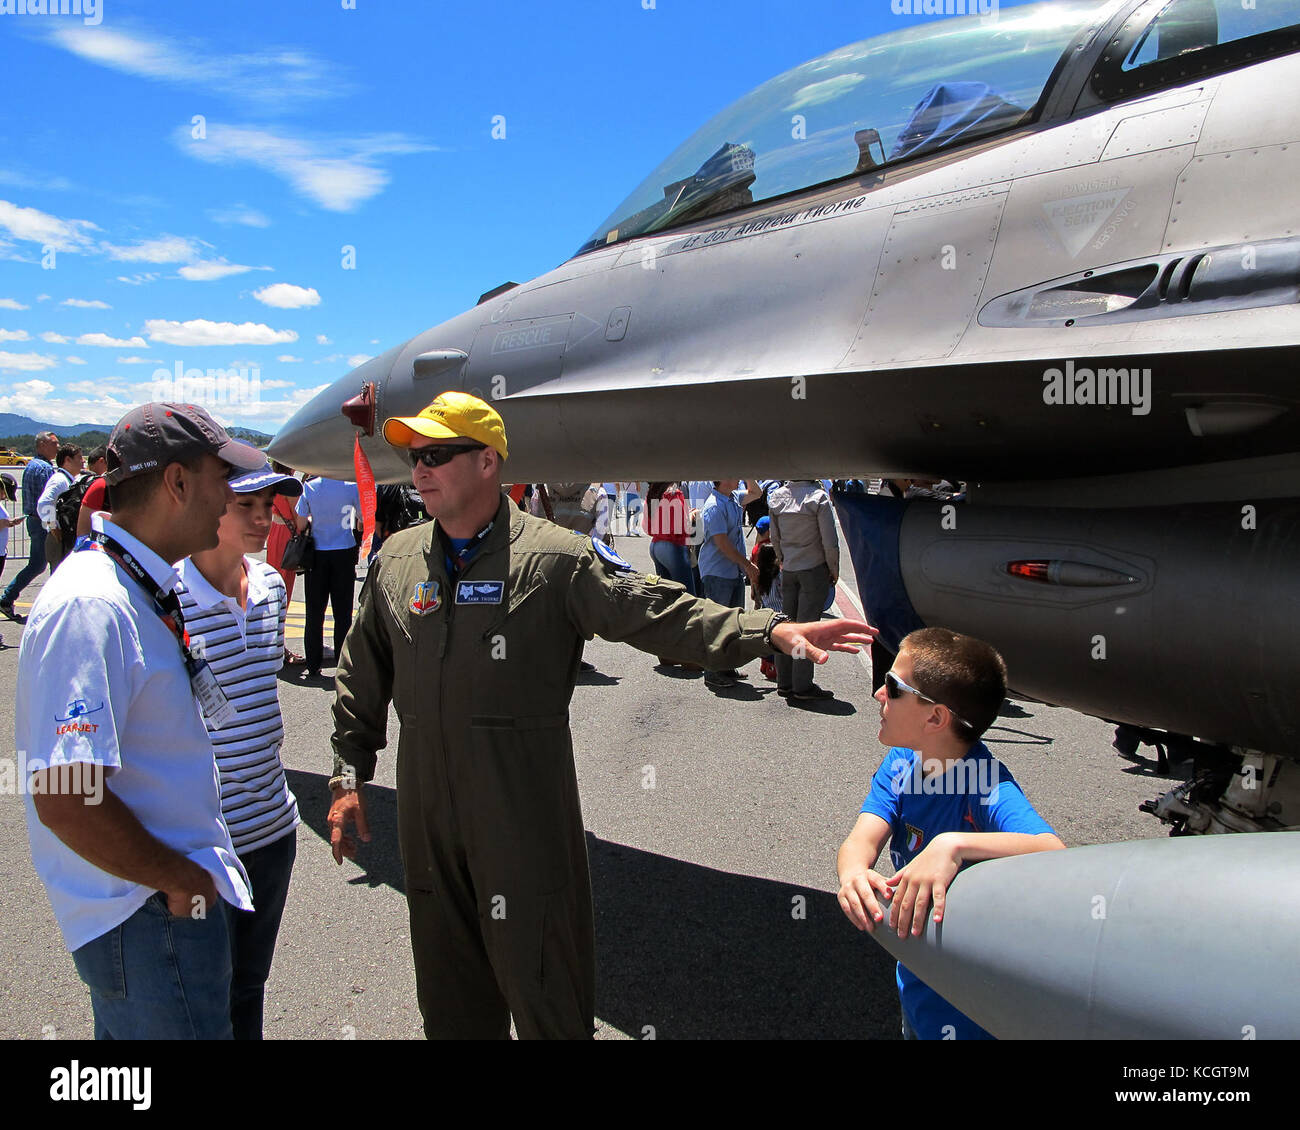 U.S. Air Force Lt. Col. Andrew Thorne, an F-16 pilot with the South Carolina Air National Guard’s 169th Fighter Wing speaks to visitors during the Colombian Air Force’s Feria Aeronautica Internaccional – Colombia in Rionegro, Colombia, July 13, 2017. The United States Air Force is participating in the four-day air show with two South Carolina Air National Guard F-16s as static displays, plus static displays of a KC-135, KC-10, along with an aerial demonstration by the Air Combat Command’s Viper East Demo Team and a B-52 flyover. The United States military participation in the air show provides Stock Photo